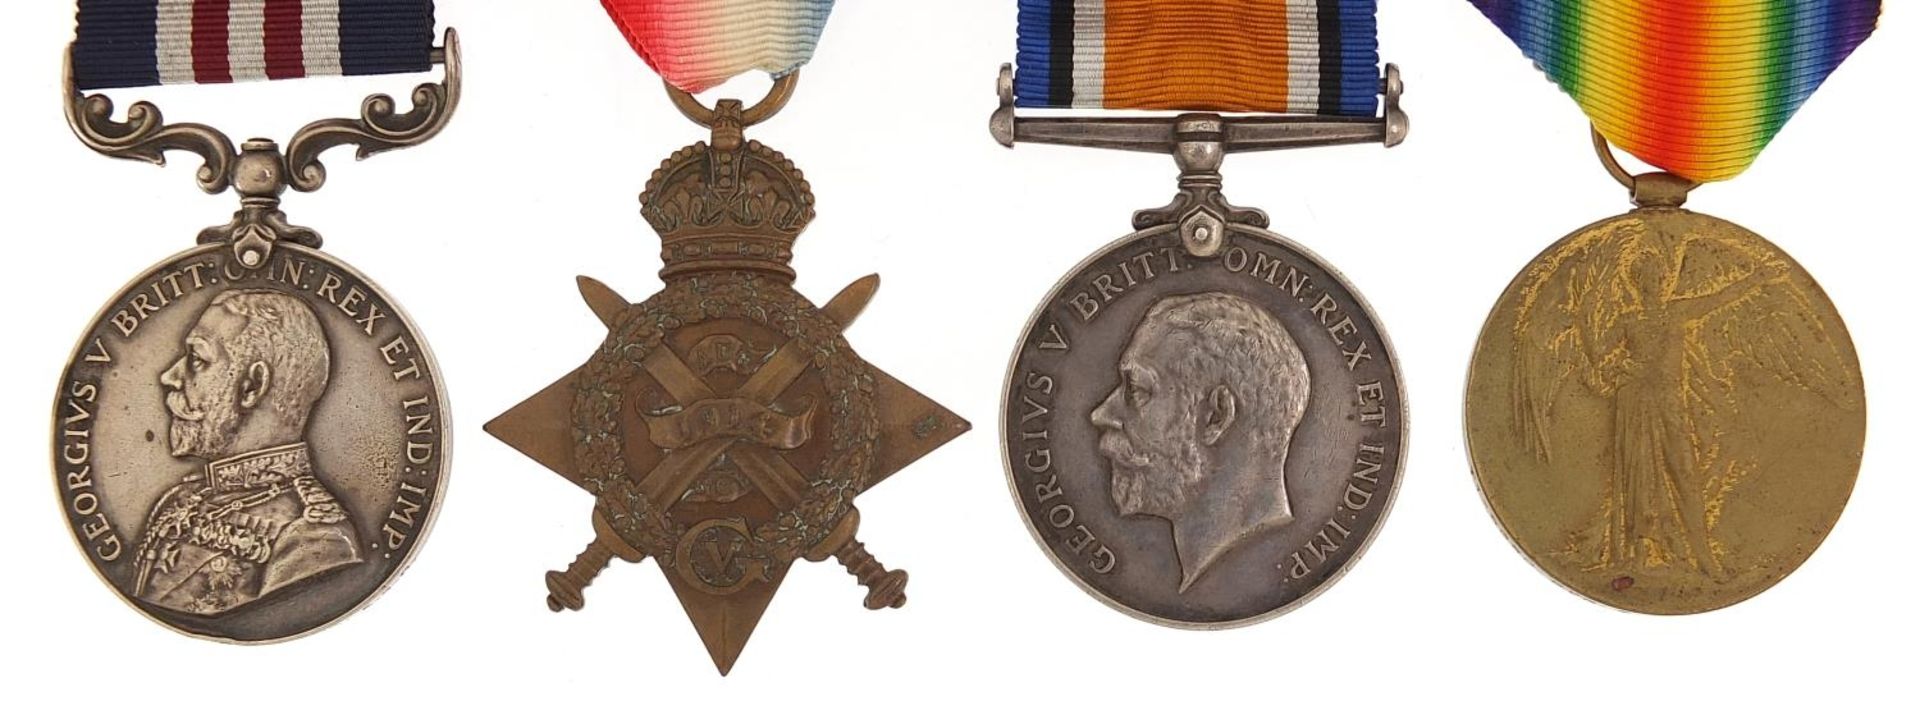 British military World War I four medal group with related ephemera including a Mons Star and George